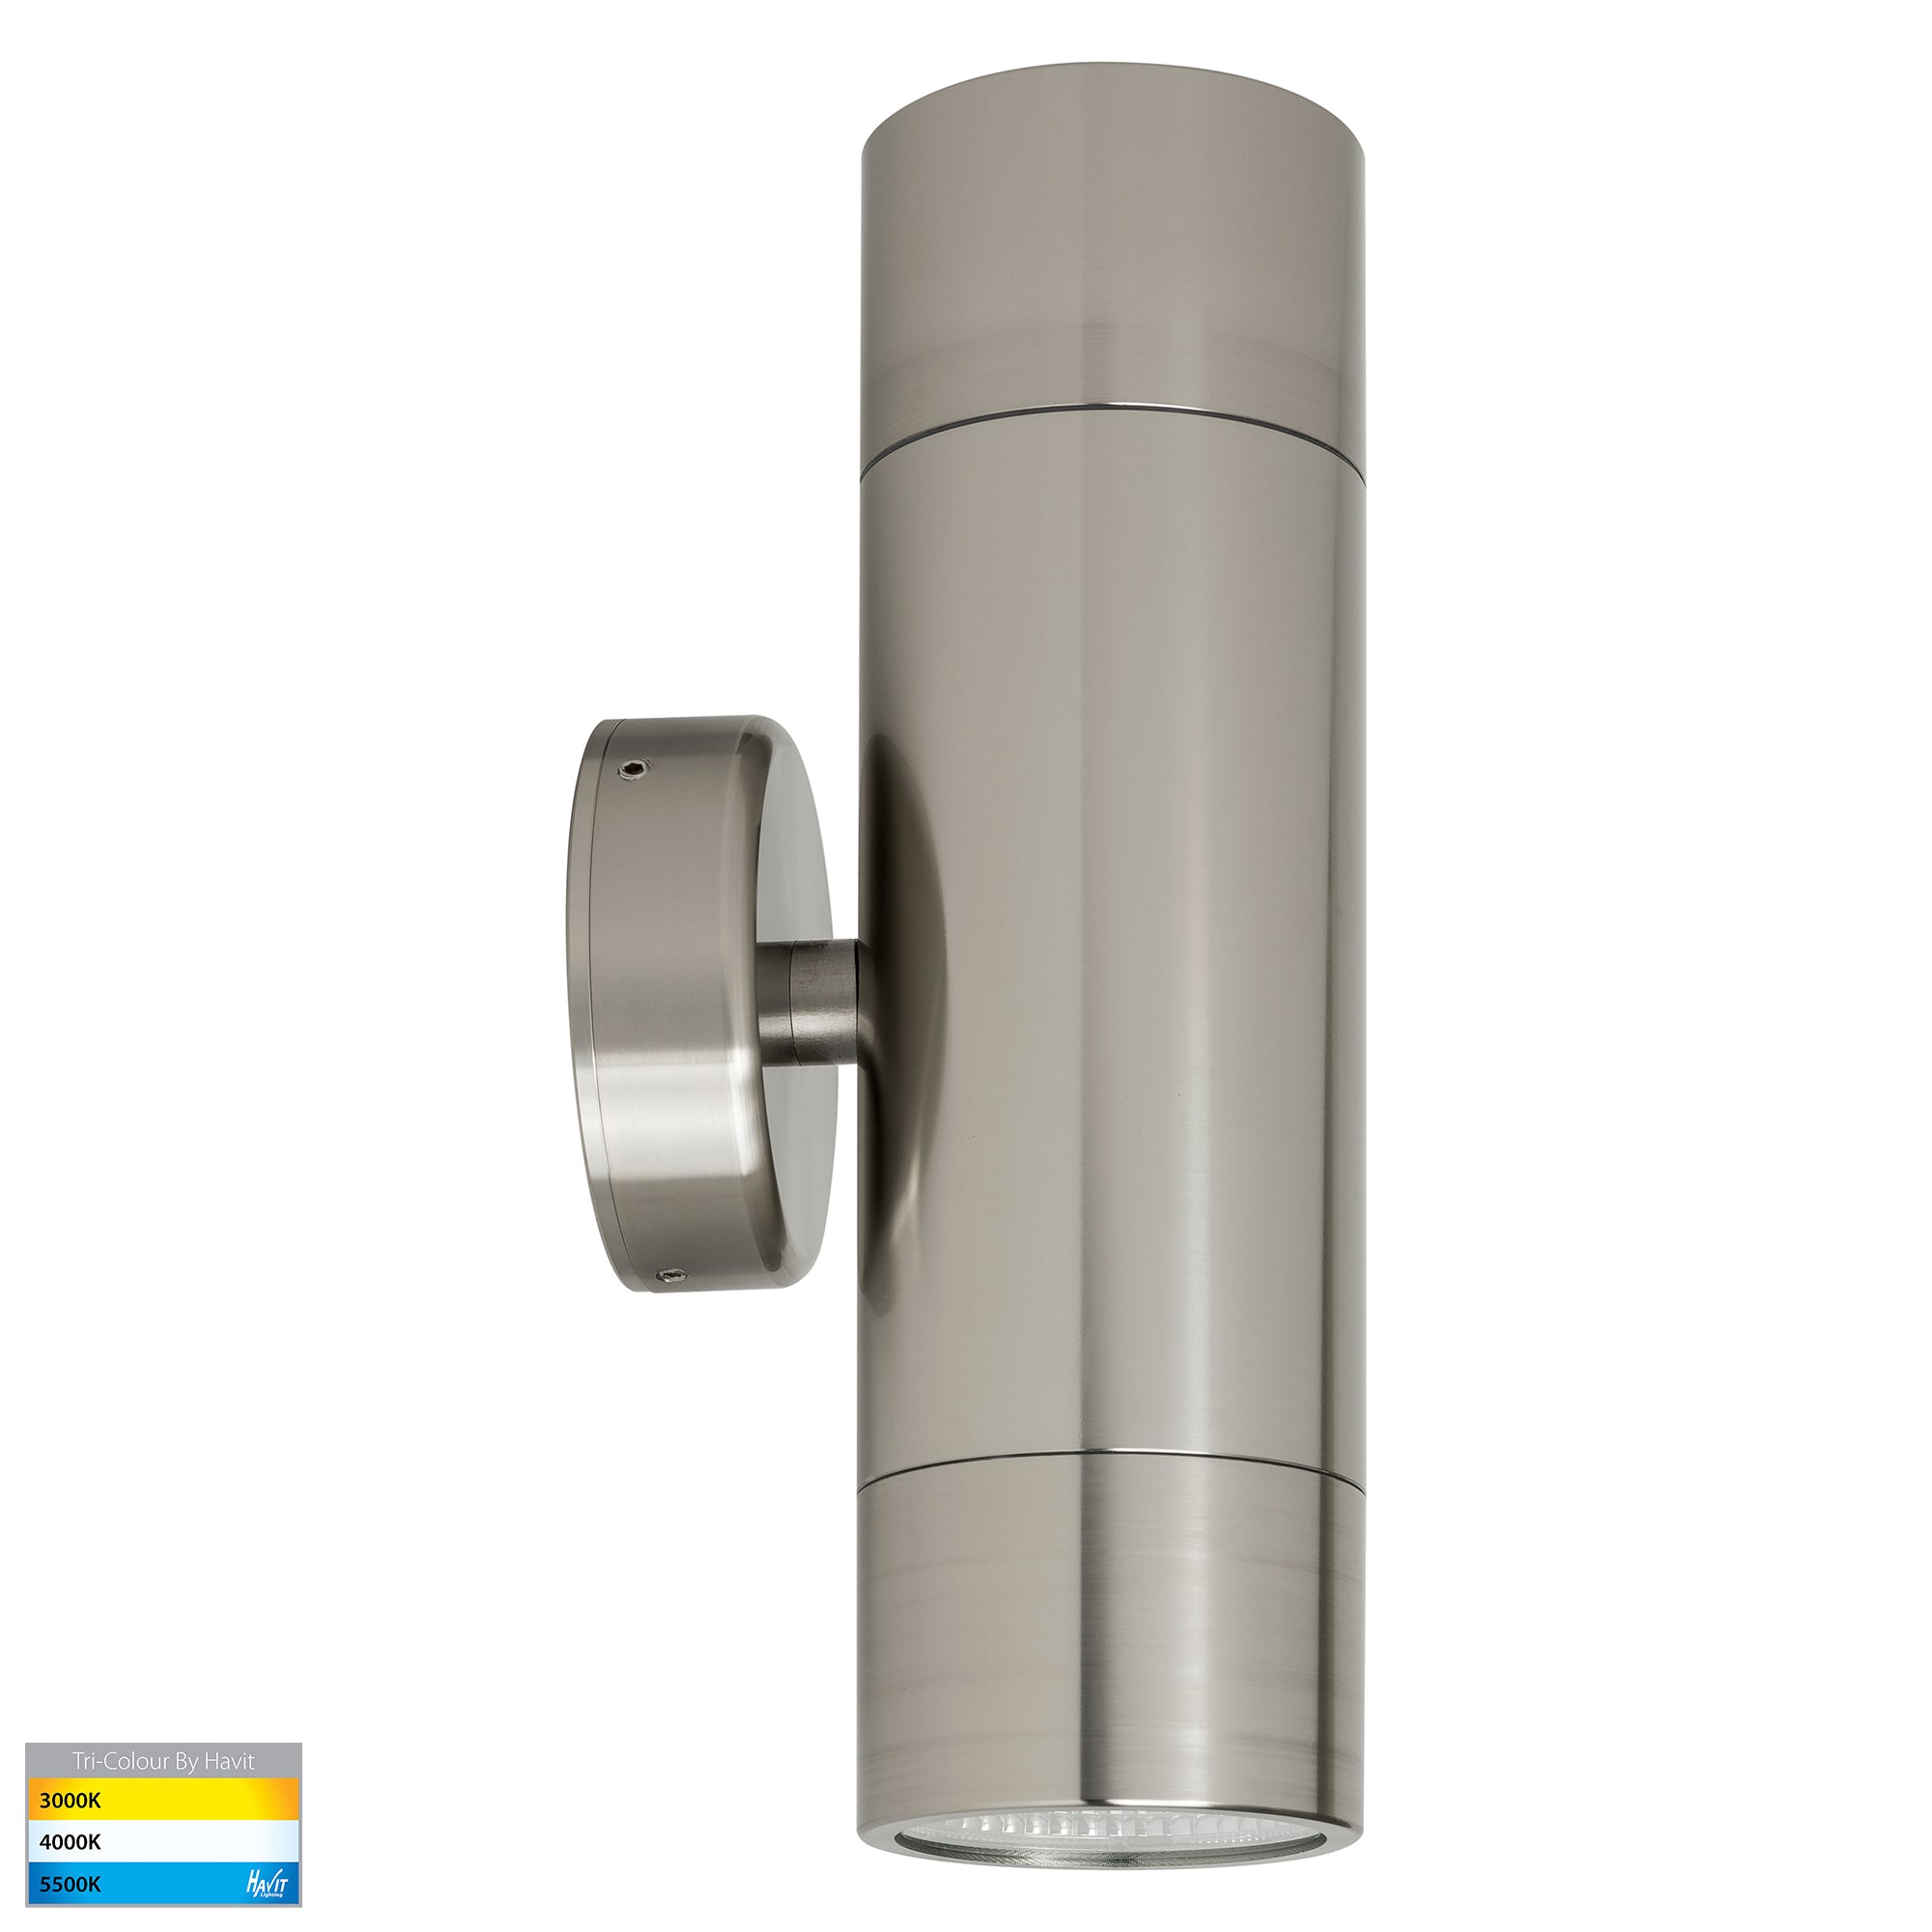 HV1008T - Maxi Tivah 316 Stainless Steel TRI Colour Up & Down Wall Pillar Lights